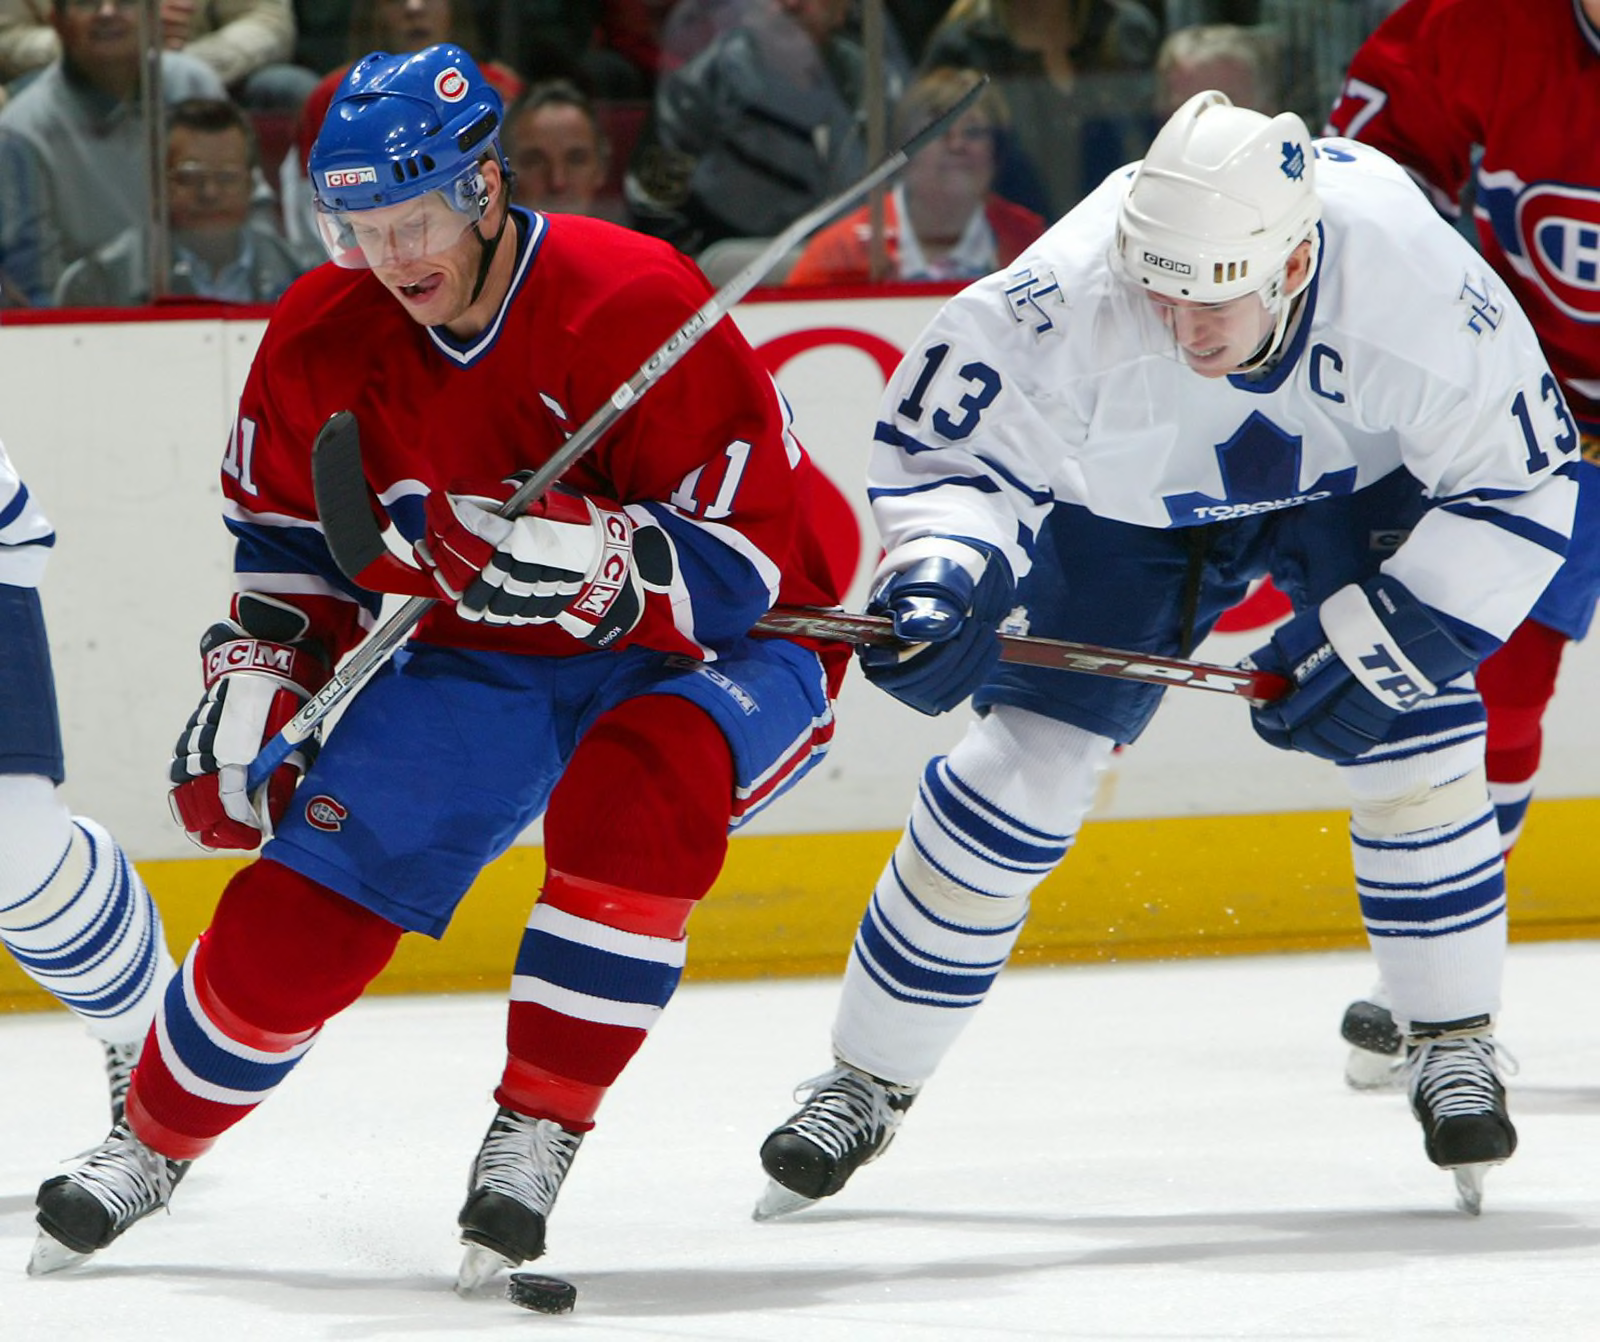 Quick Shifts: The real reason Vancouver chased Mats Sundin